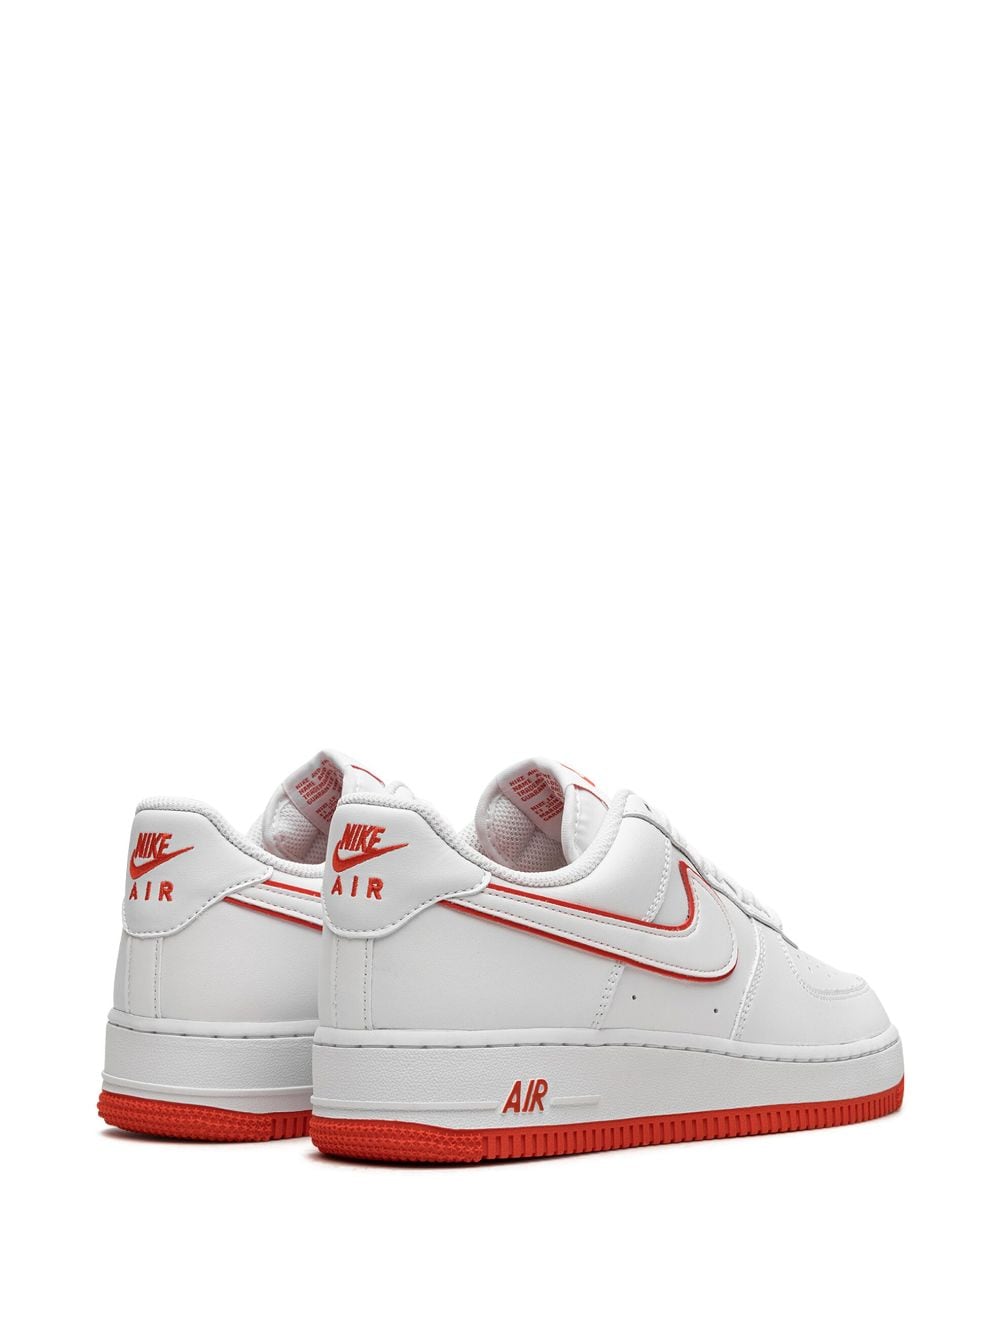 Air Force One PICANTE RED UNC